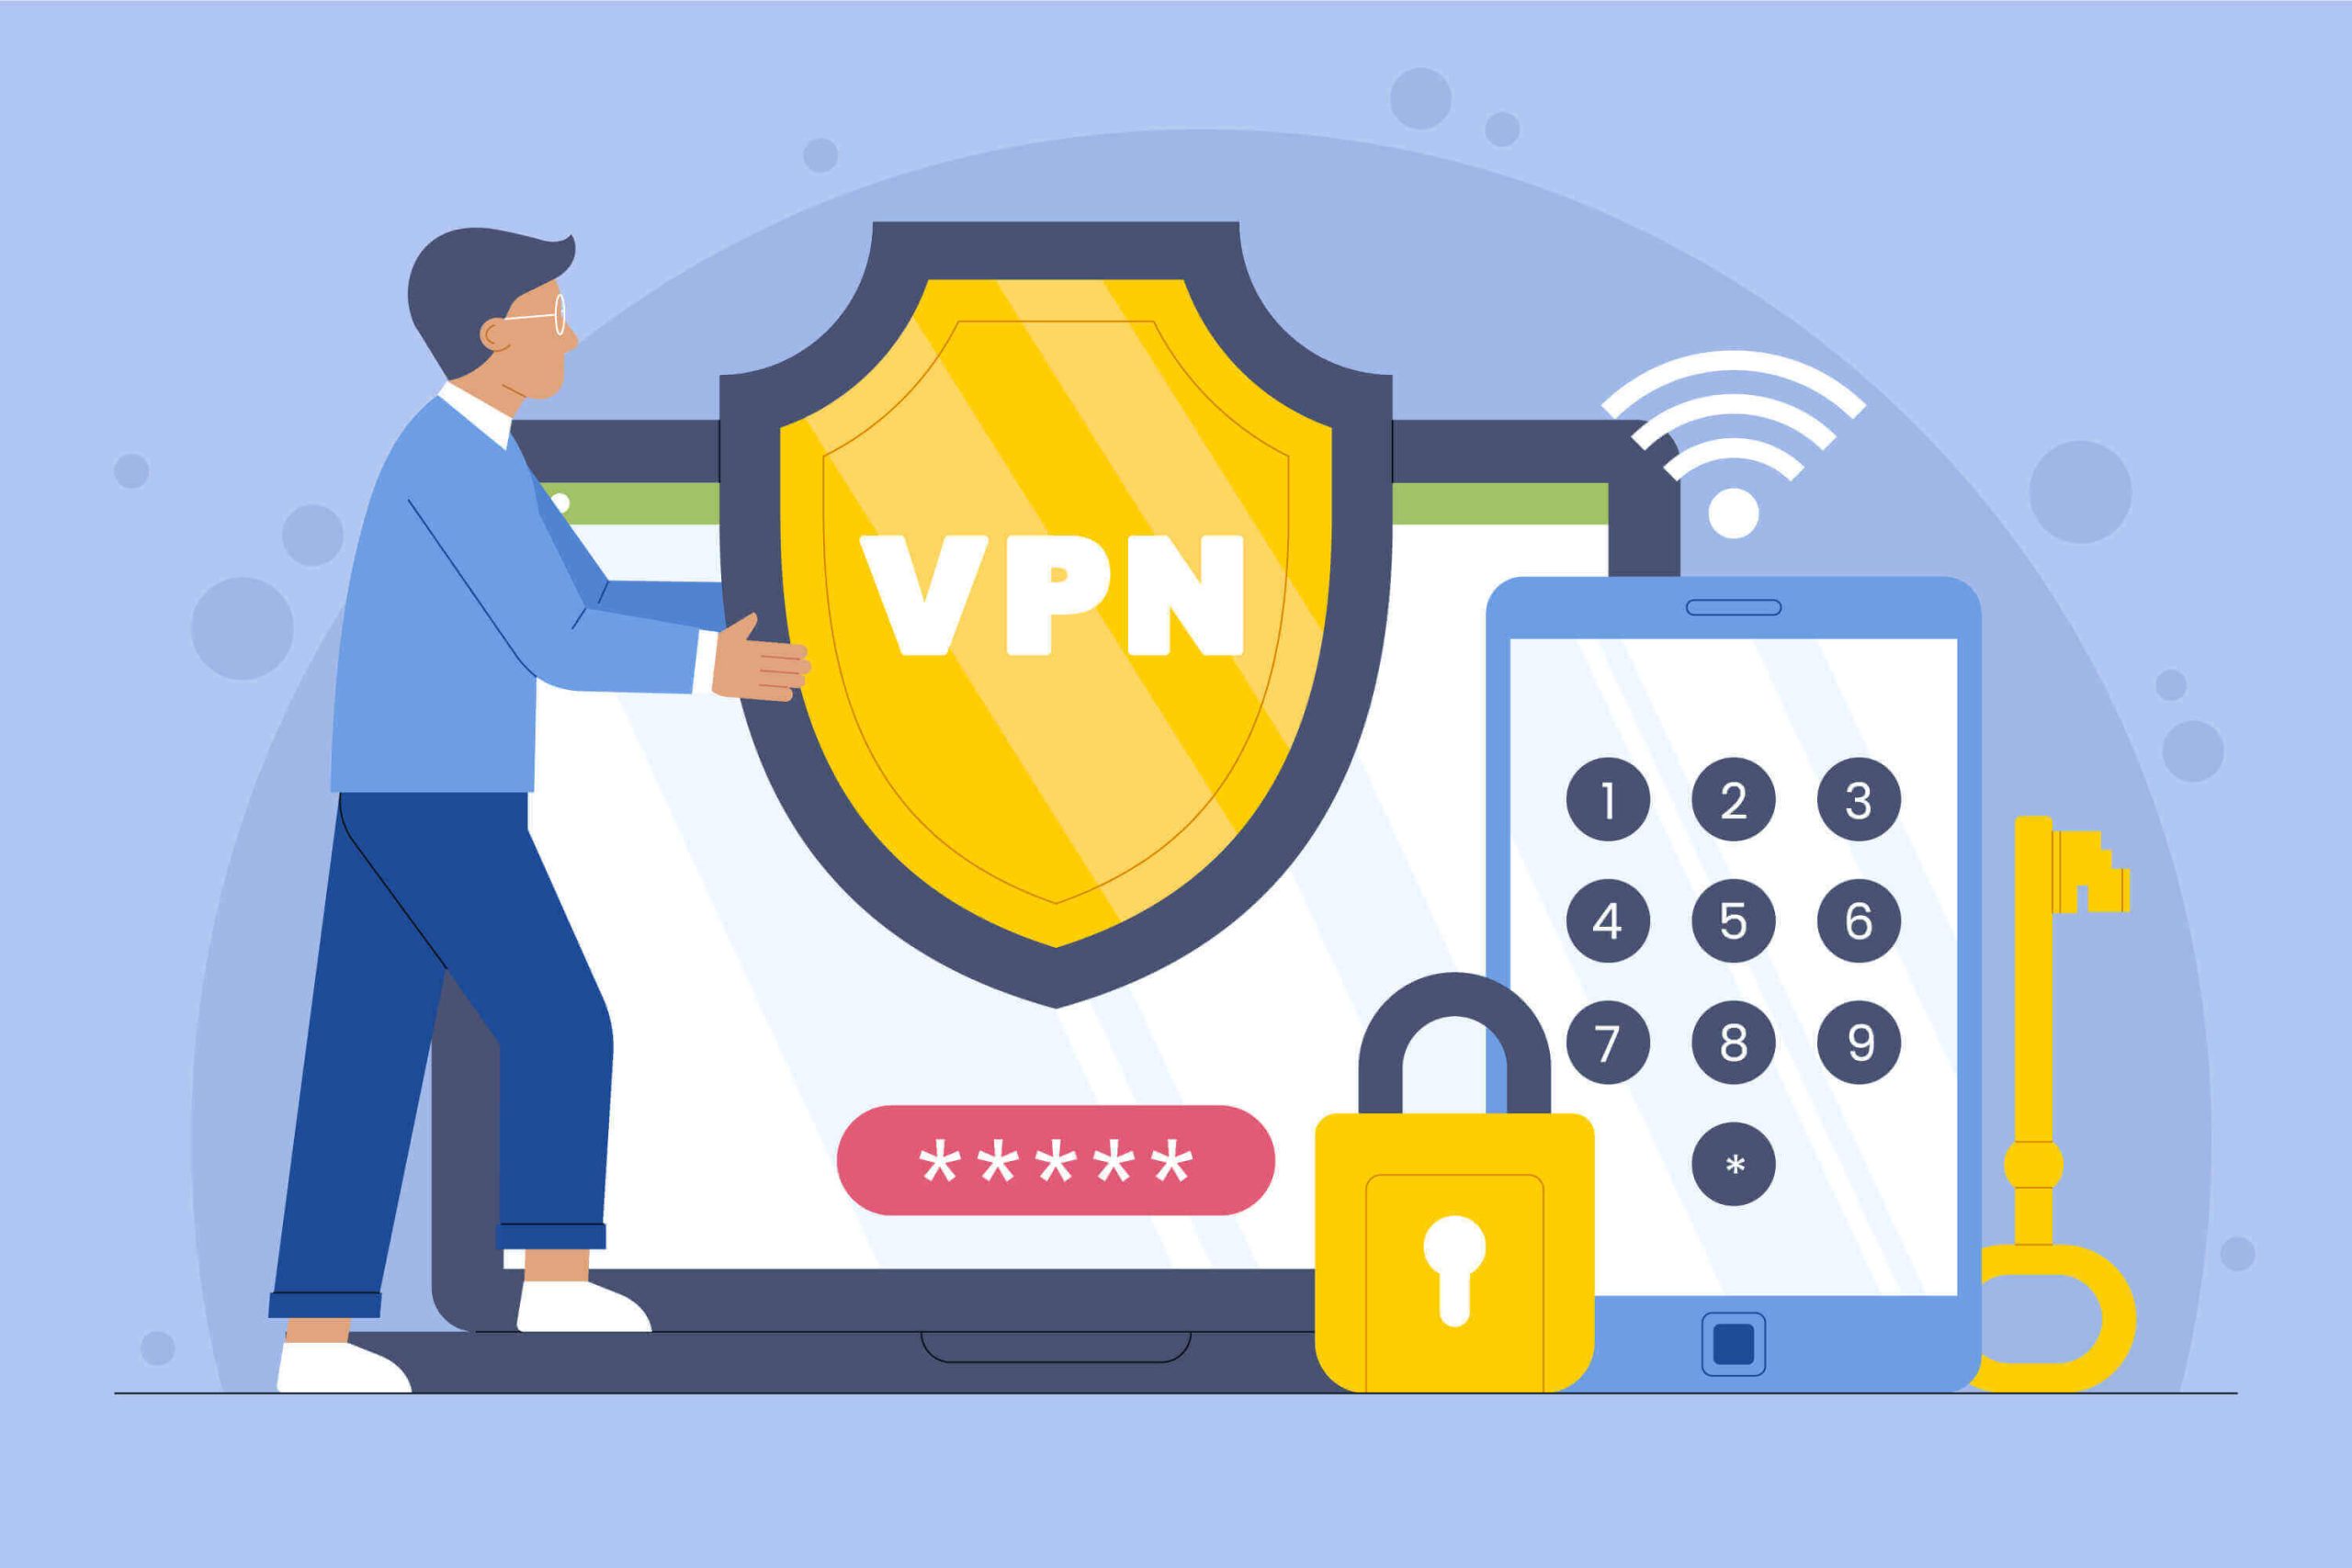 How To Choose The Best VPN? [Things To Look At]